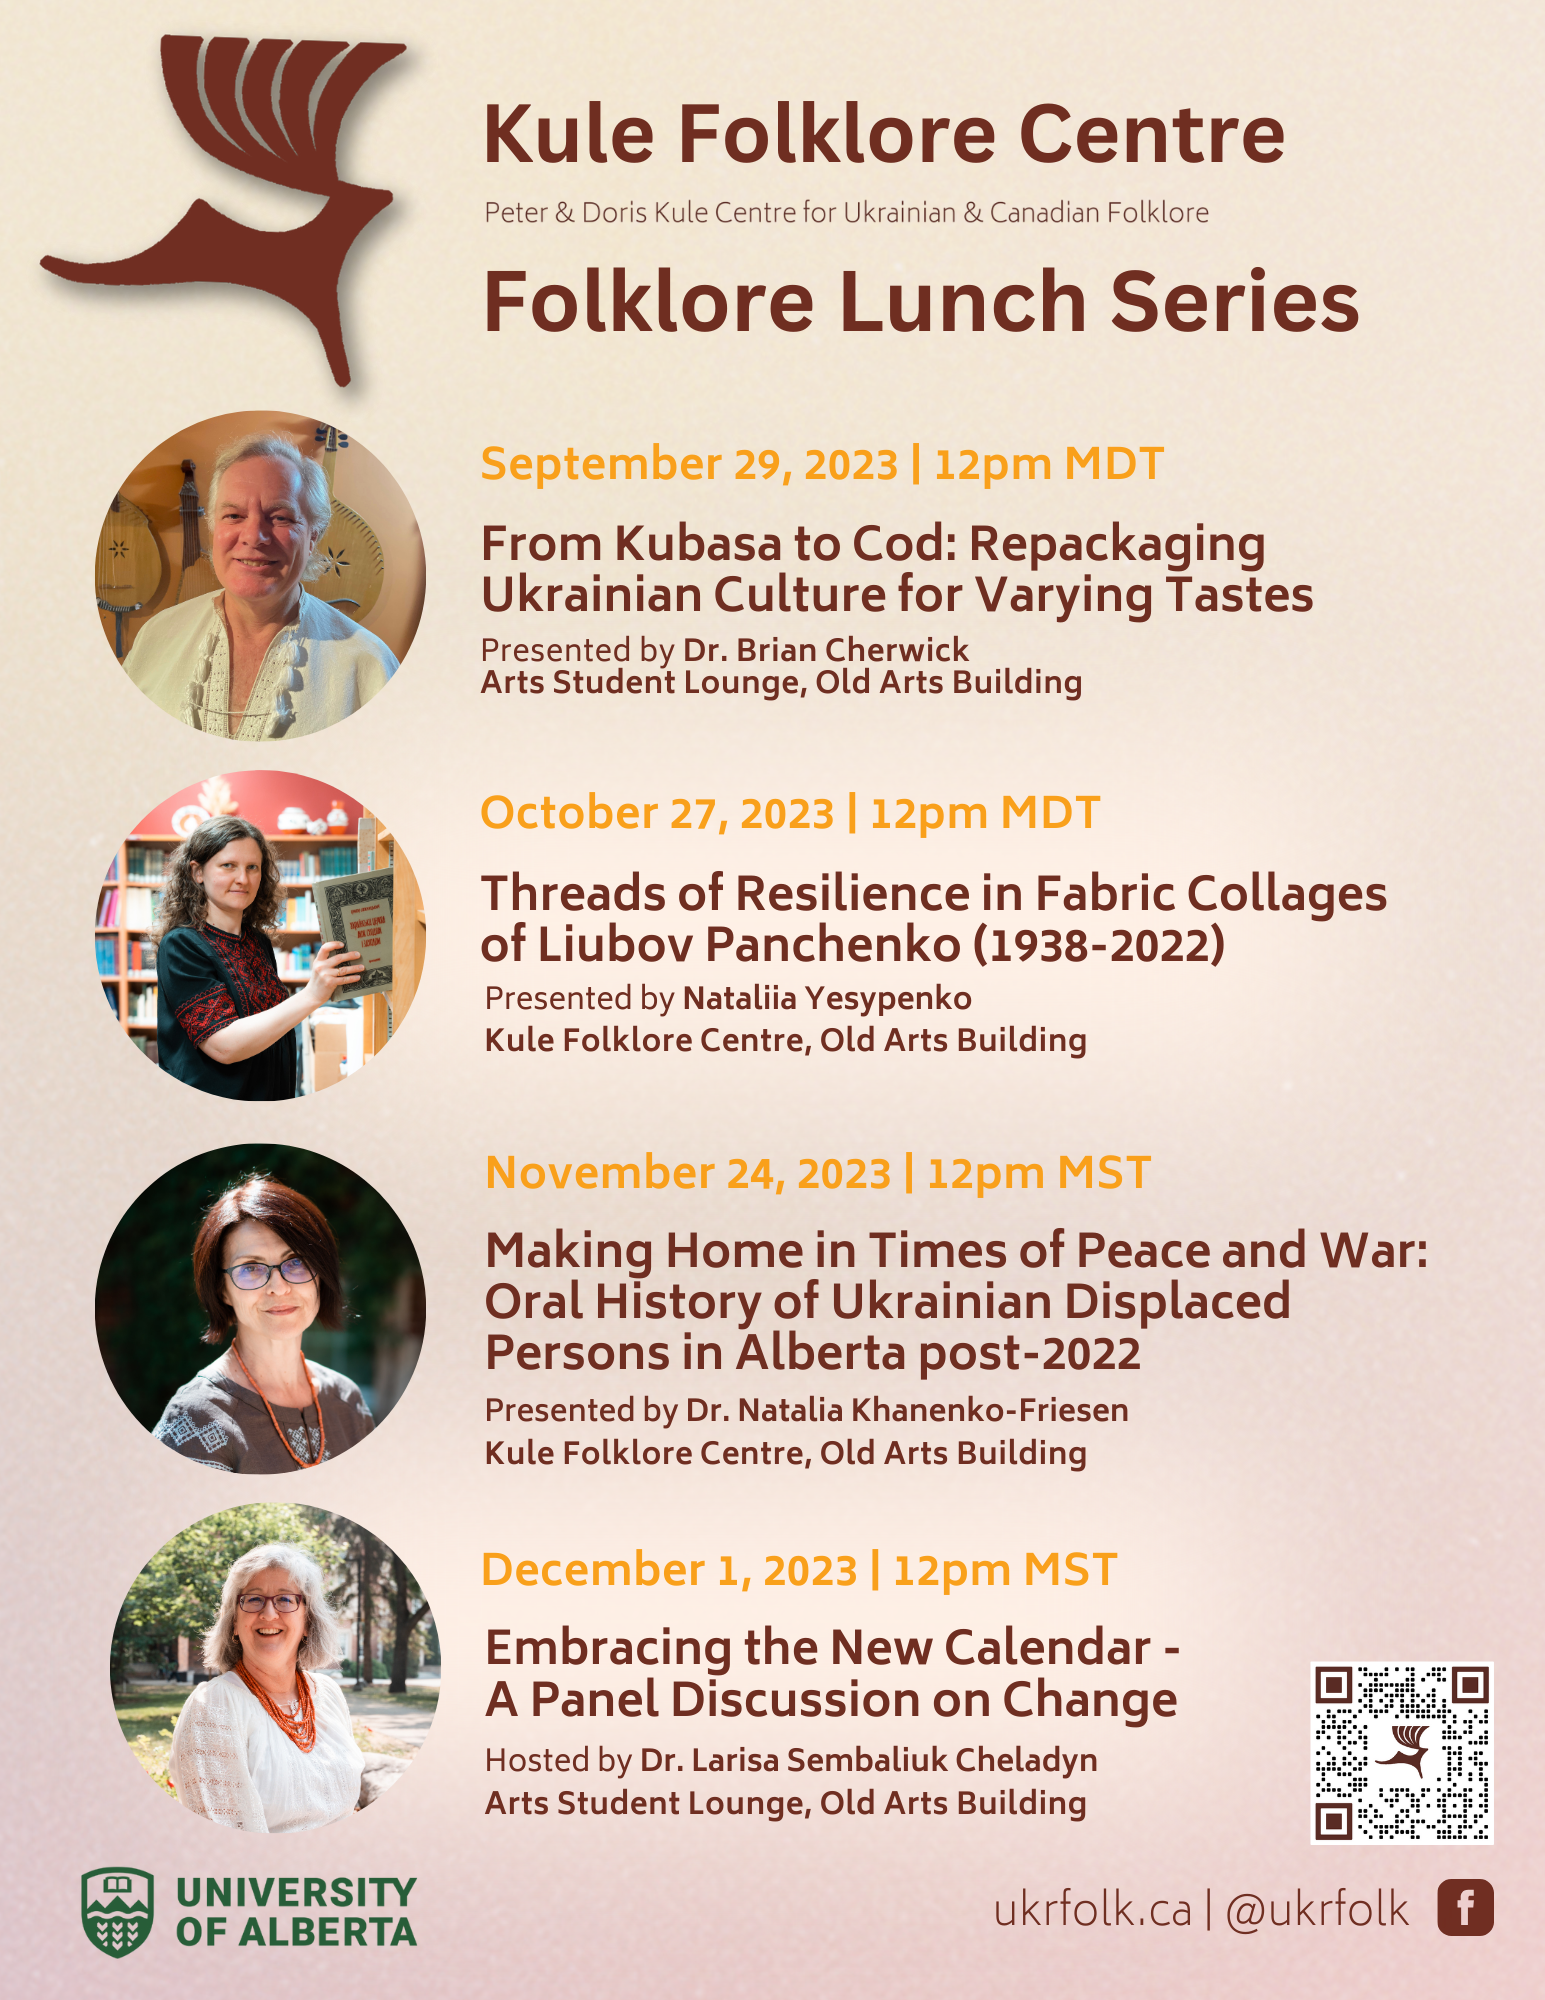 kule-folklore-centre-folklore-lunch-series-fall-2023-4.png